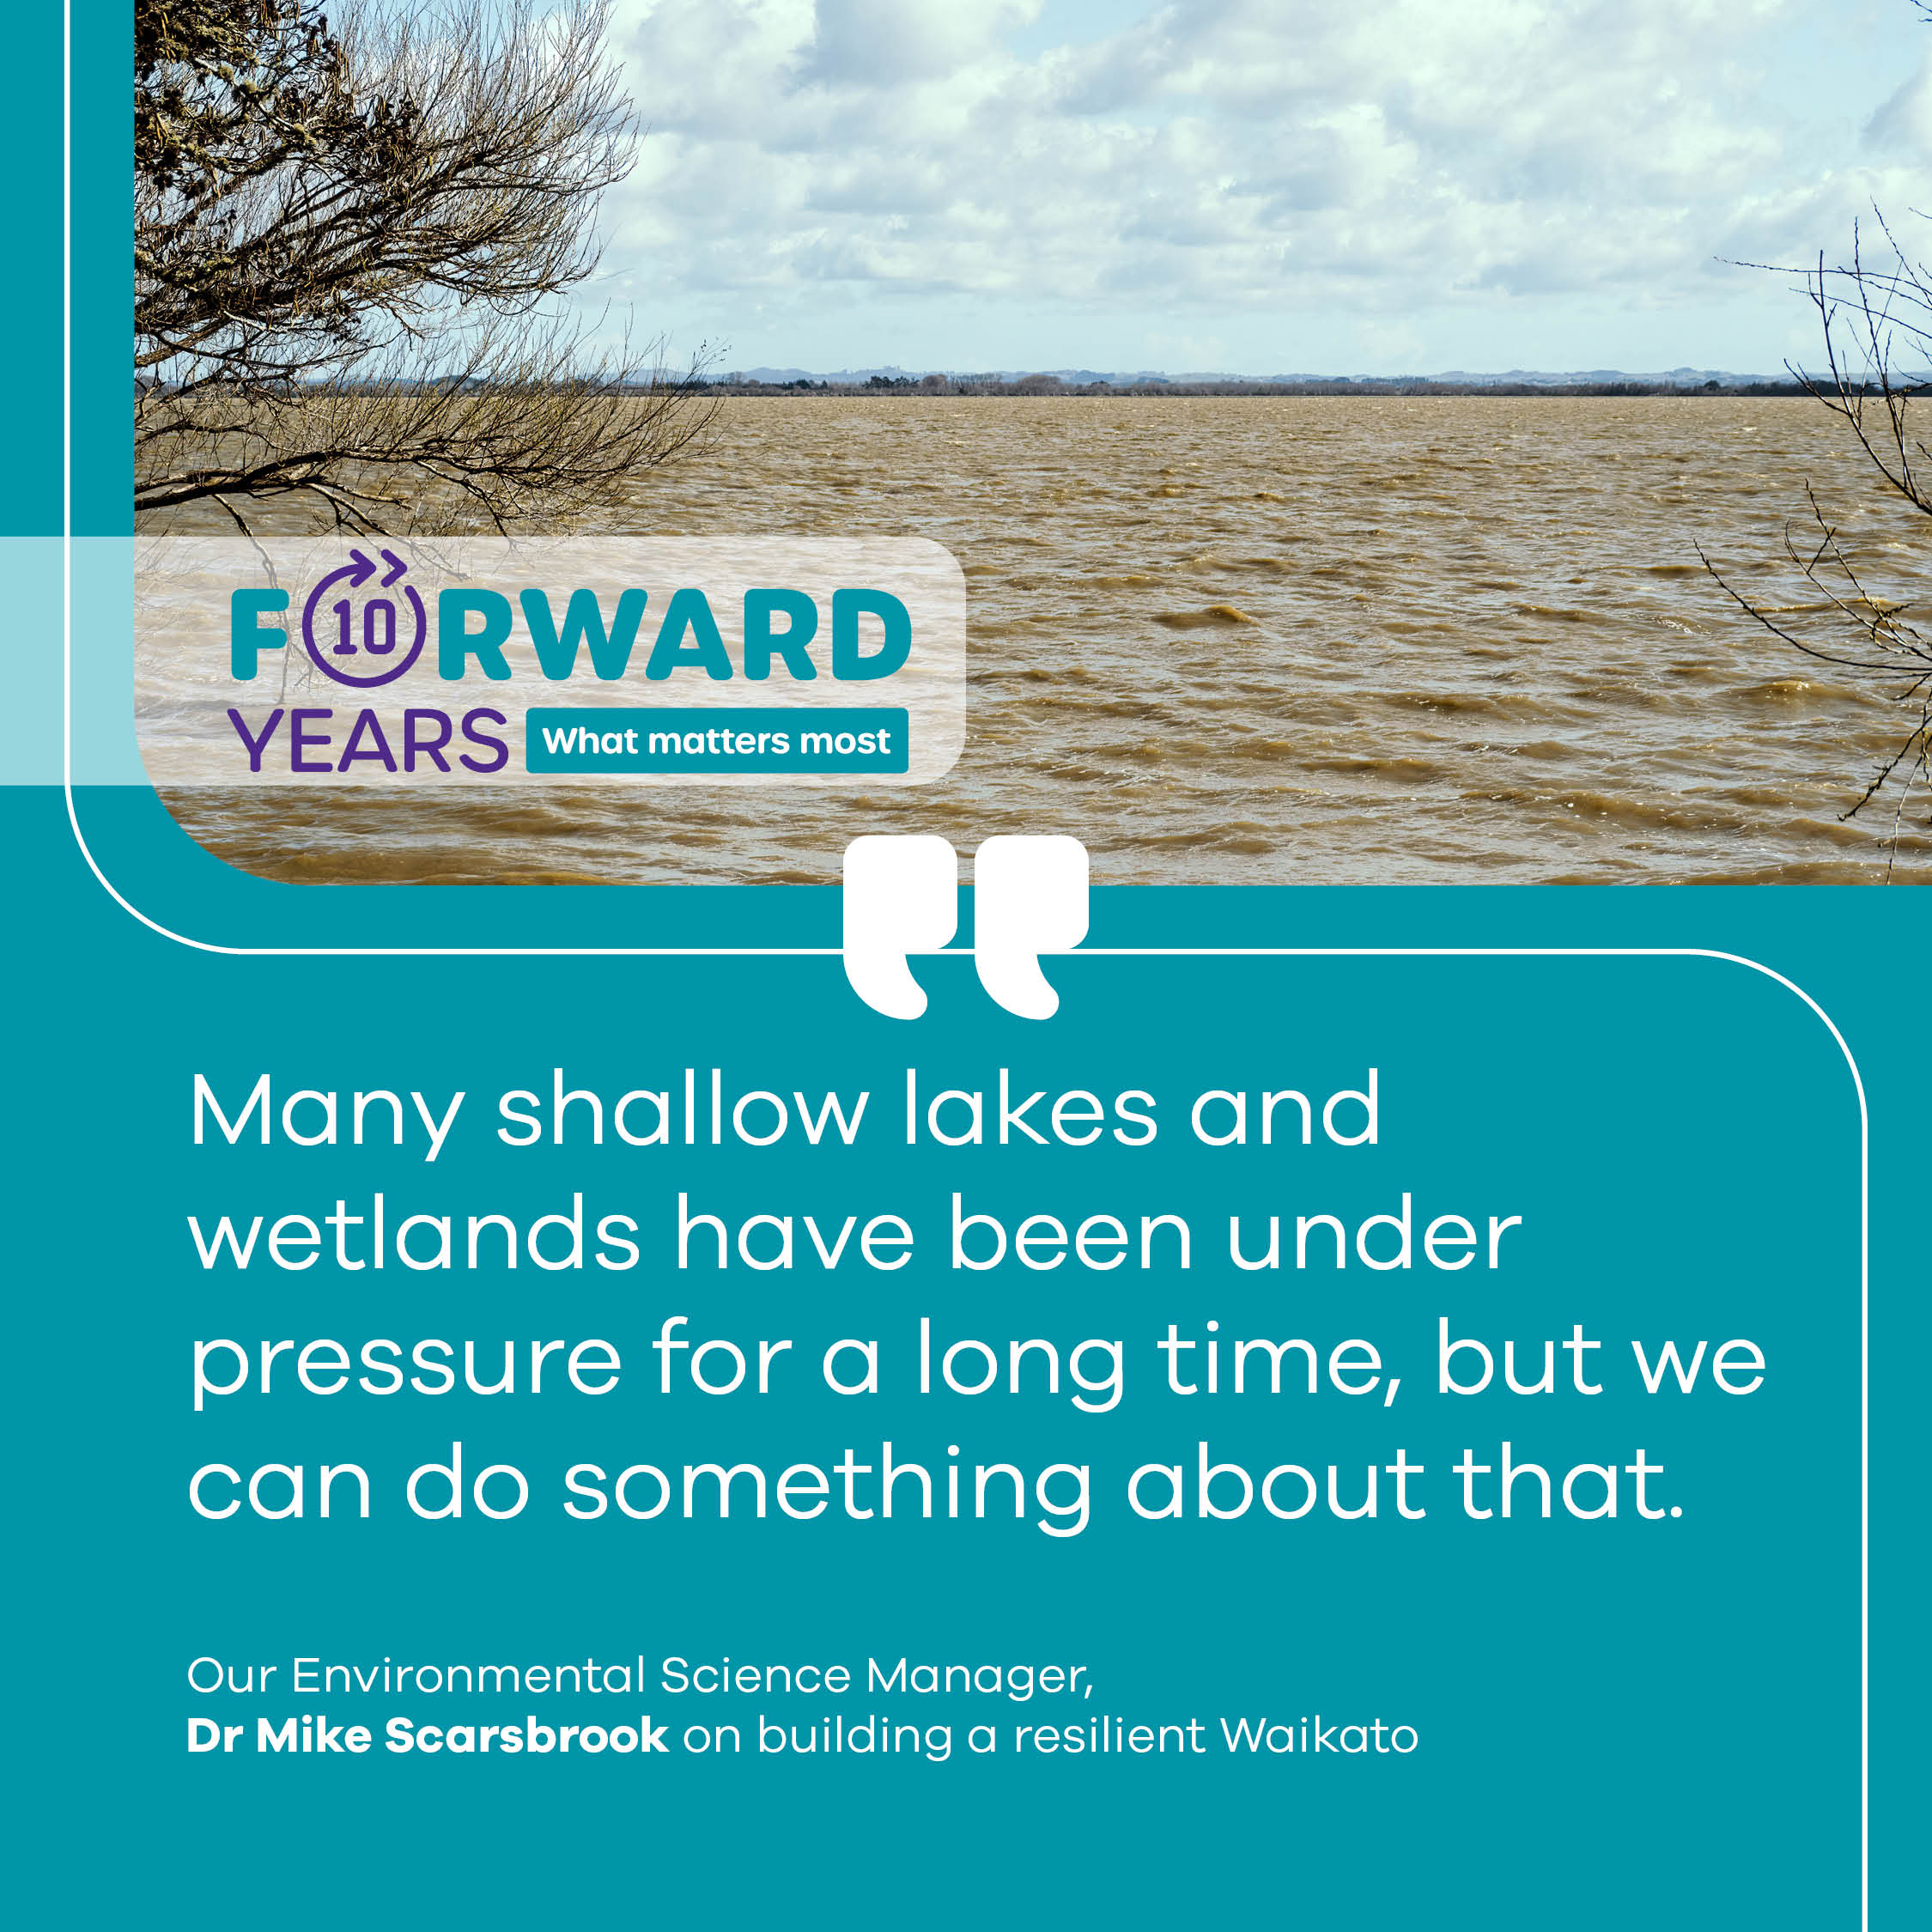 Image - LTP quote - Lakes and Wetlands